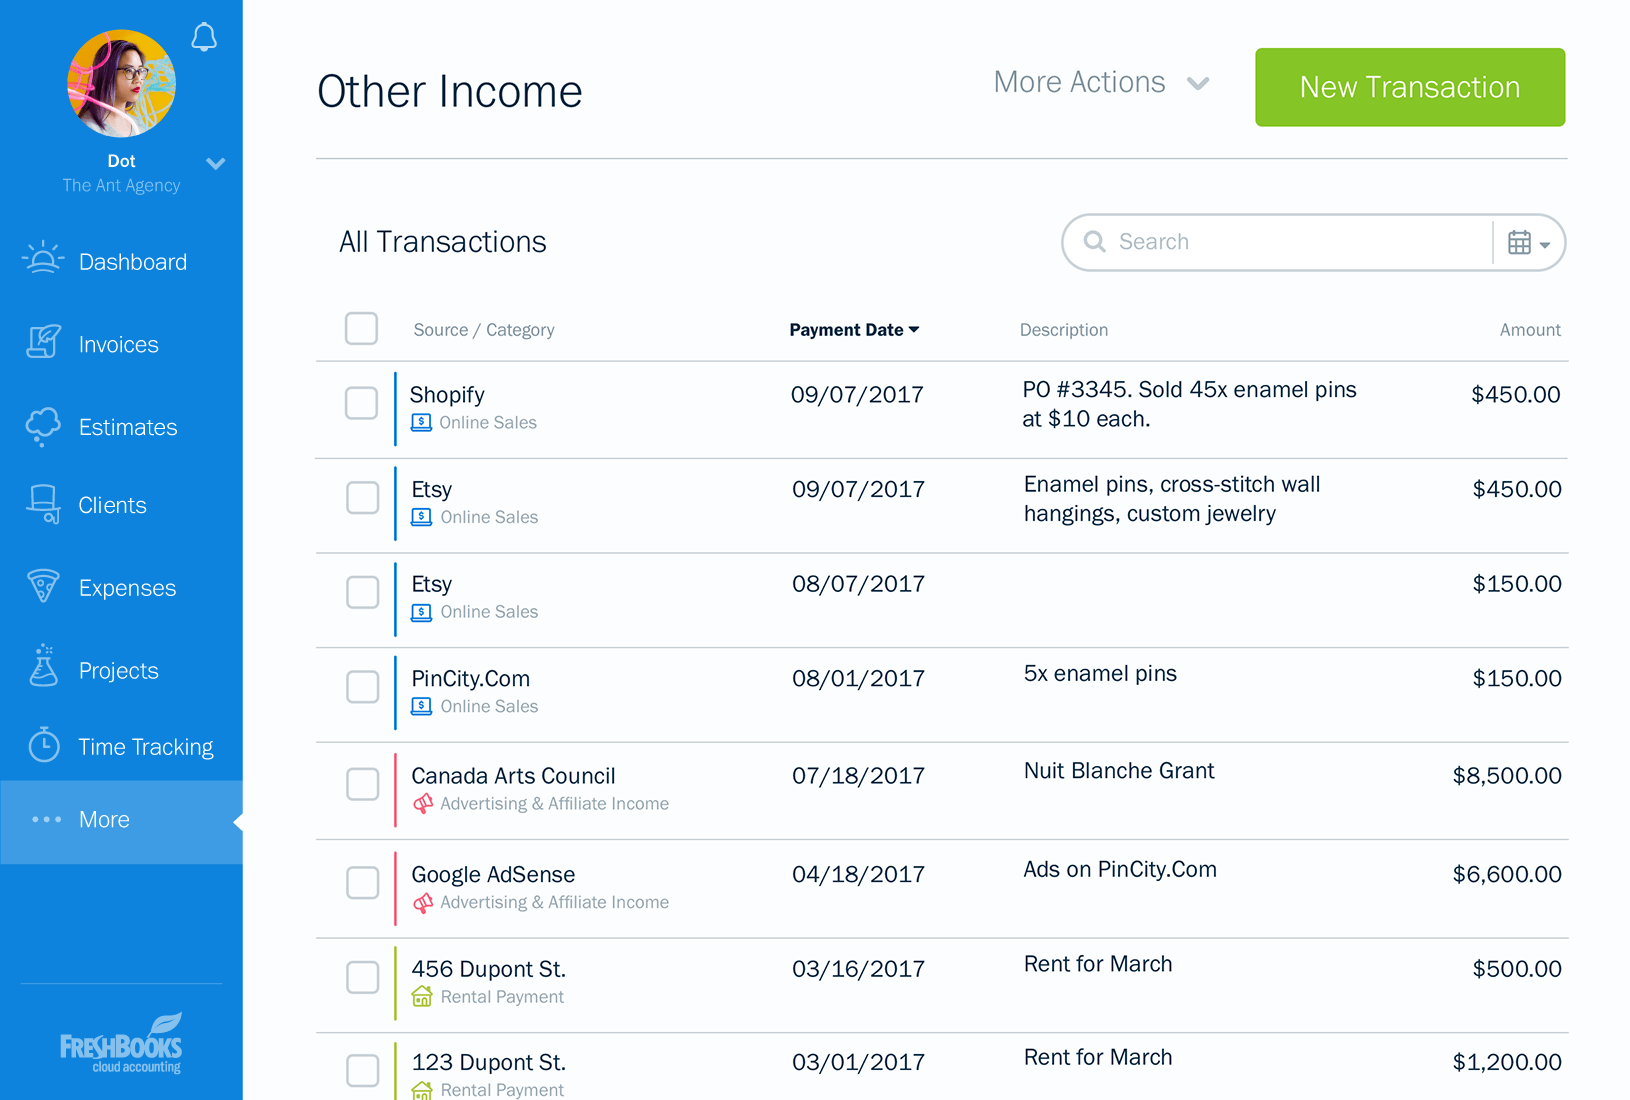 The Other Income page